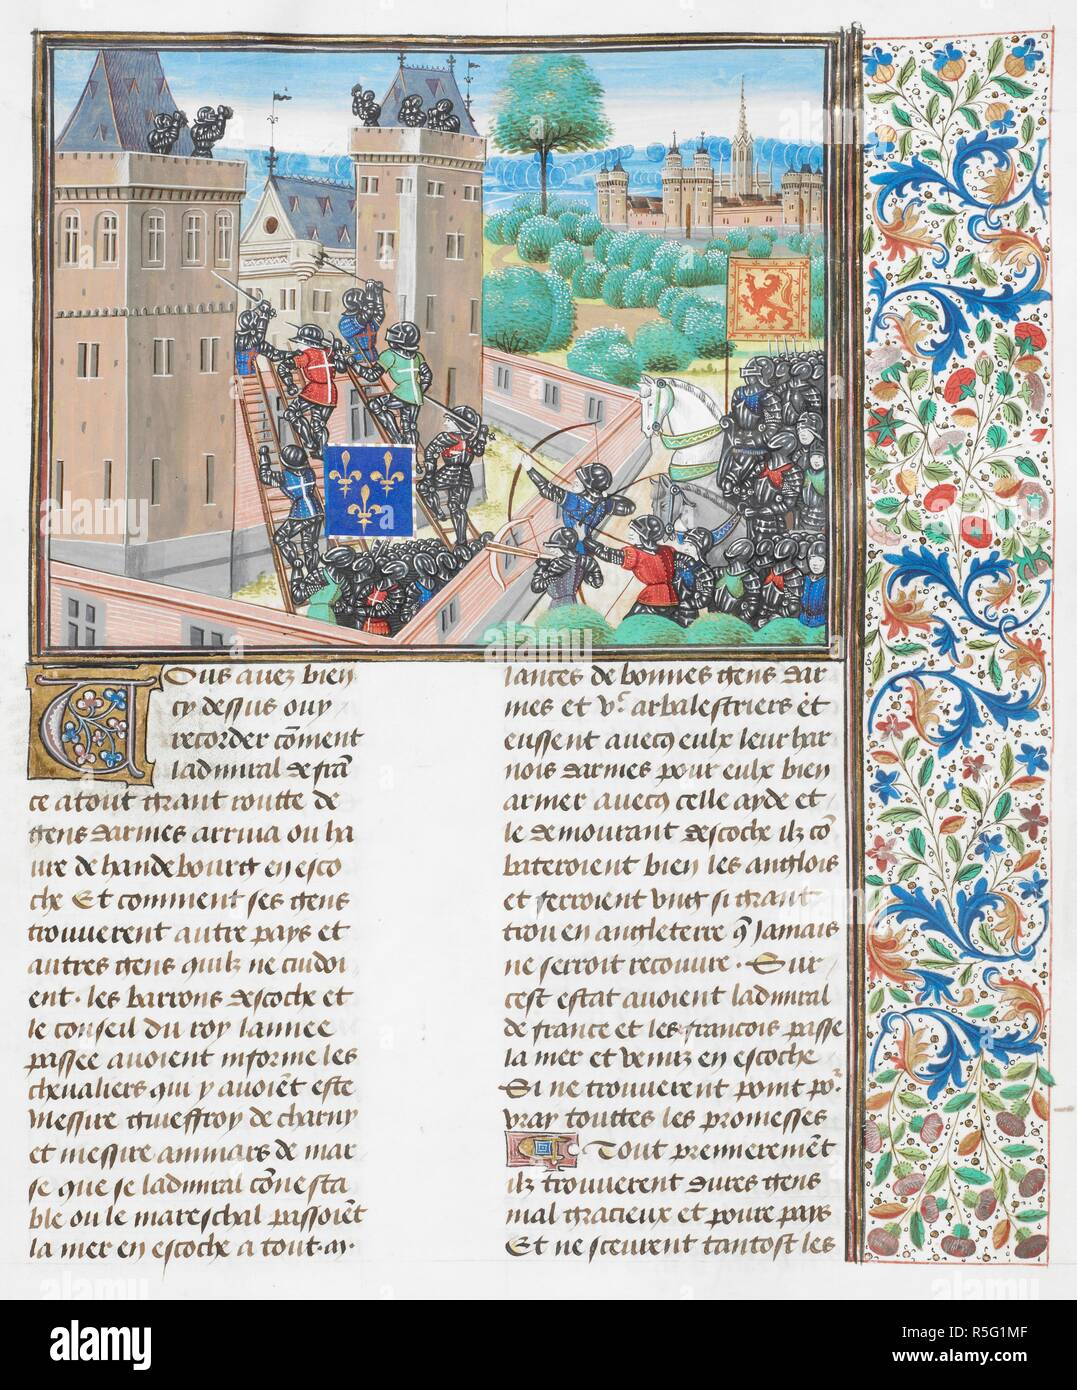 Capture of Wark Castle. Text and floral border. Chroniques. Netherlands, S. Last quarter of the 15th century, before 1483. Source: Royal 18 E. I f.345. Language: French. Author: FROISSART, JEAN. Stock Photo